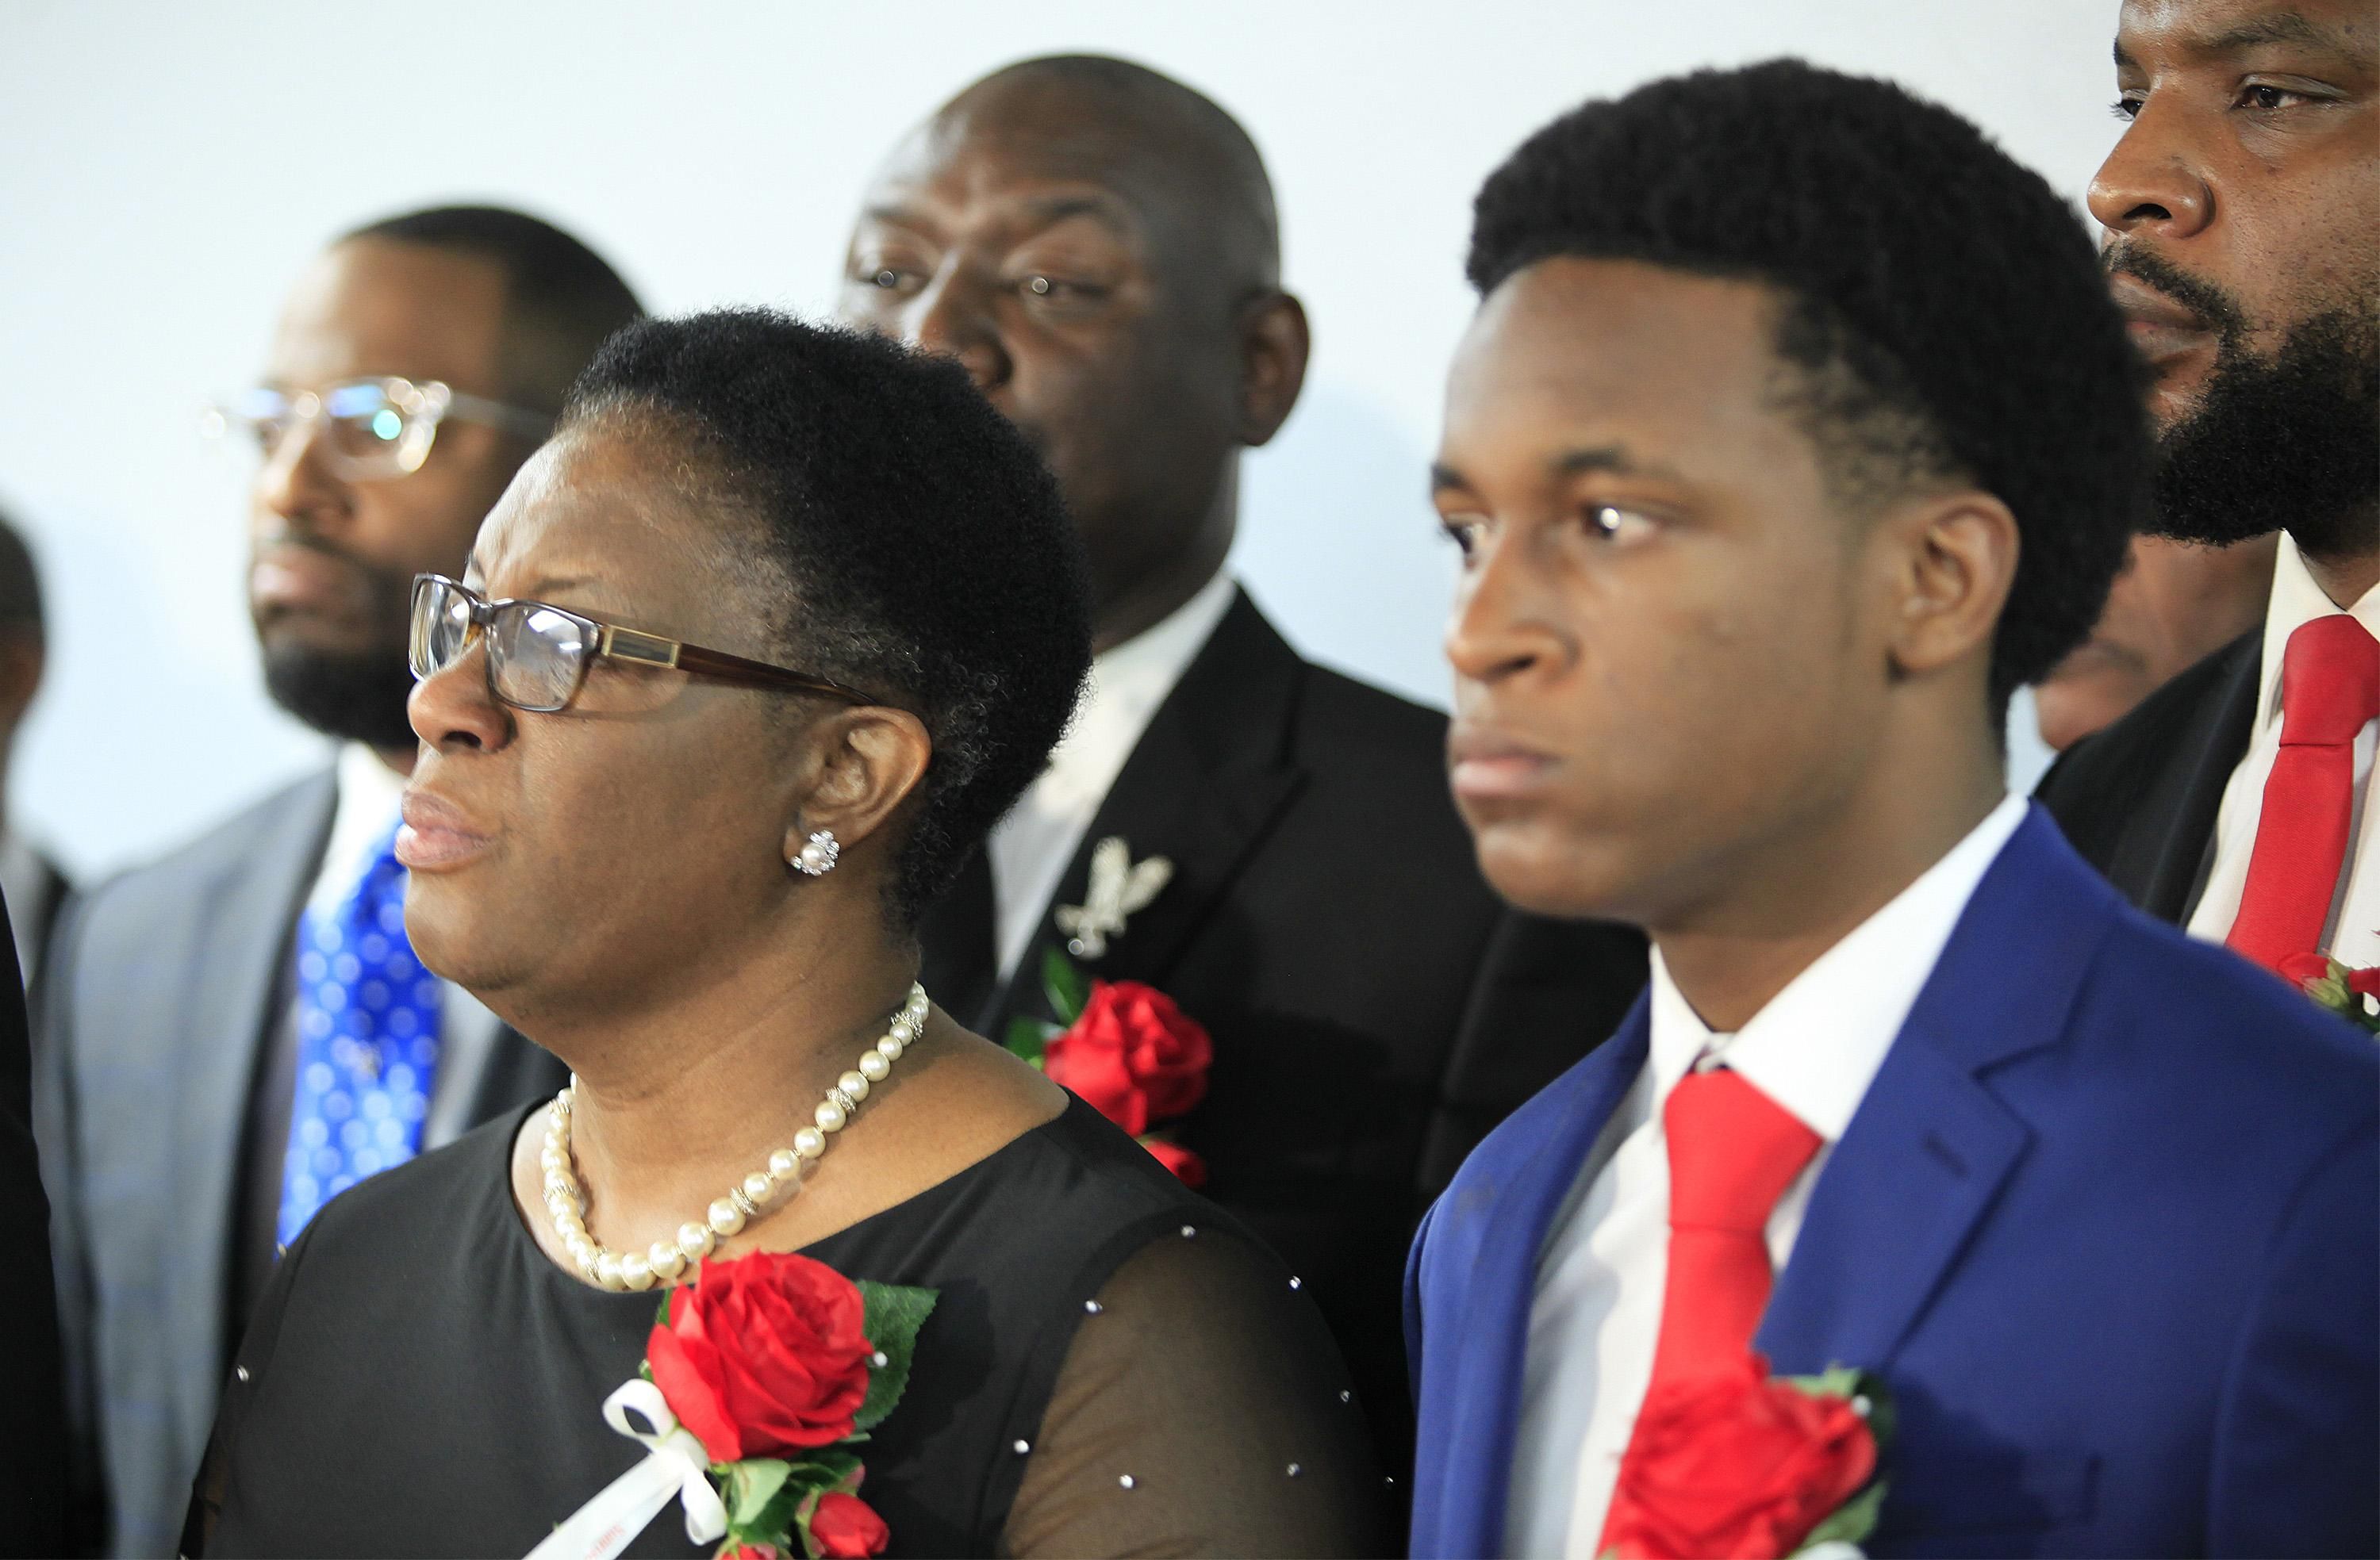 Allison Jean, mother of Botham Shem Jean, stands with family and church members of Greenville Avenue Church of Christ after the funeral service on September 13, 2018 in Richardson, Texas. (Photo by Stewart F. House/Getty Images)